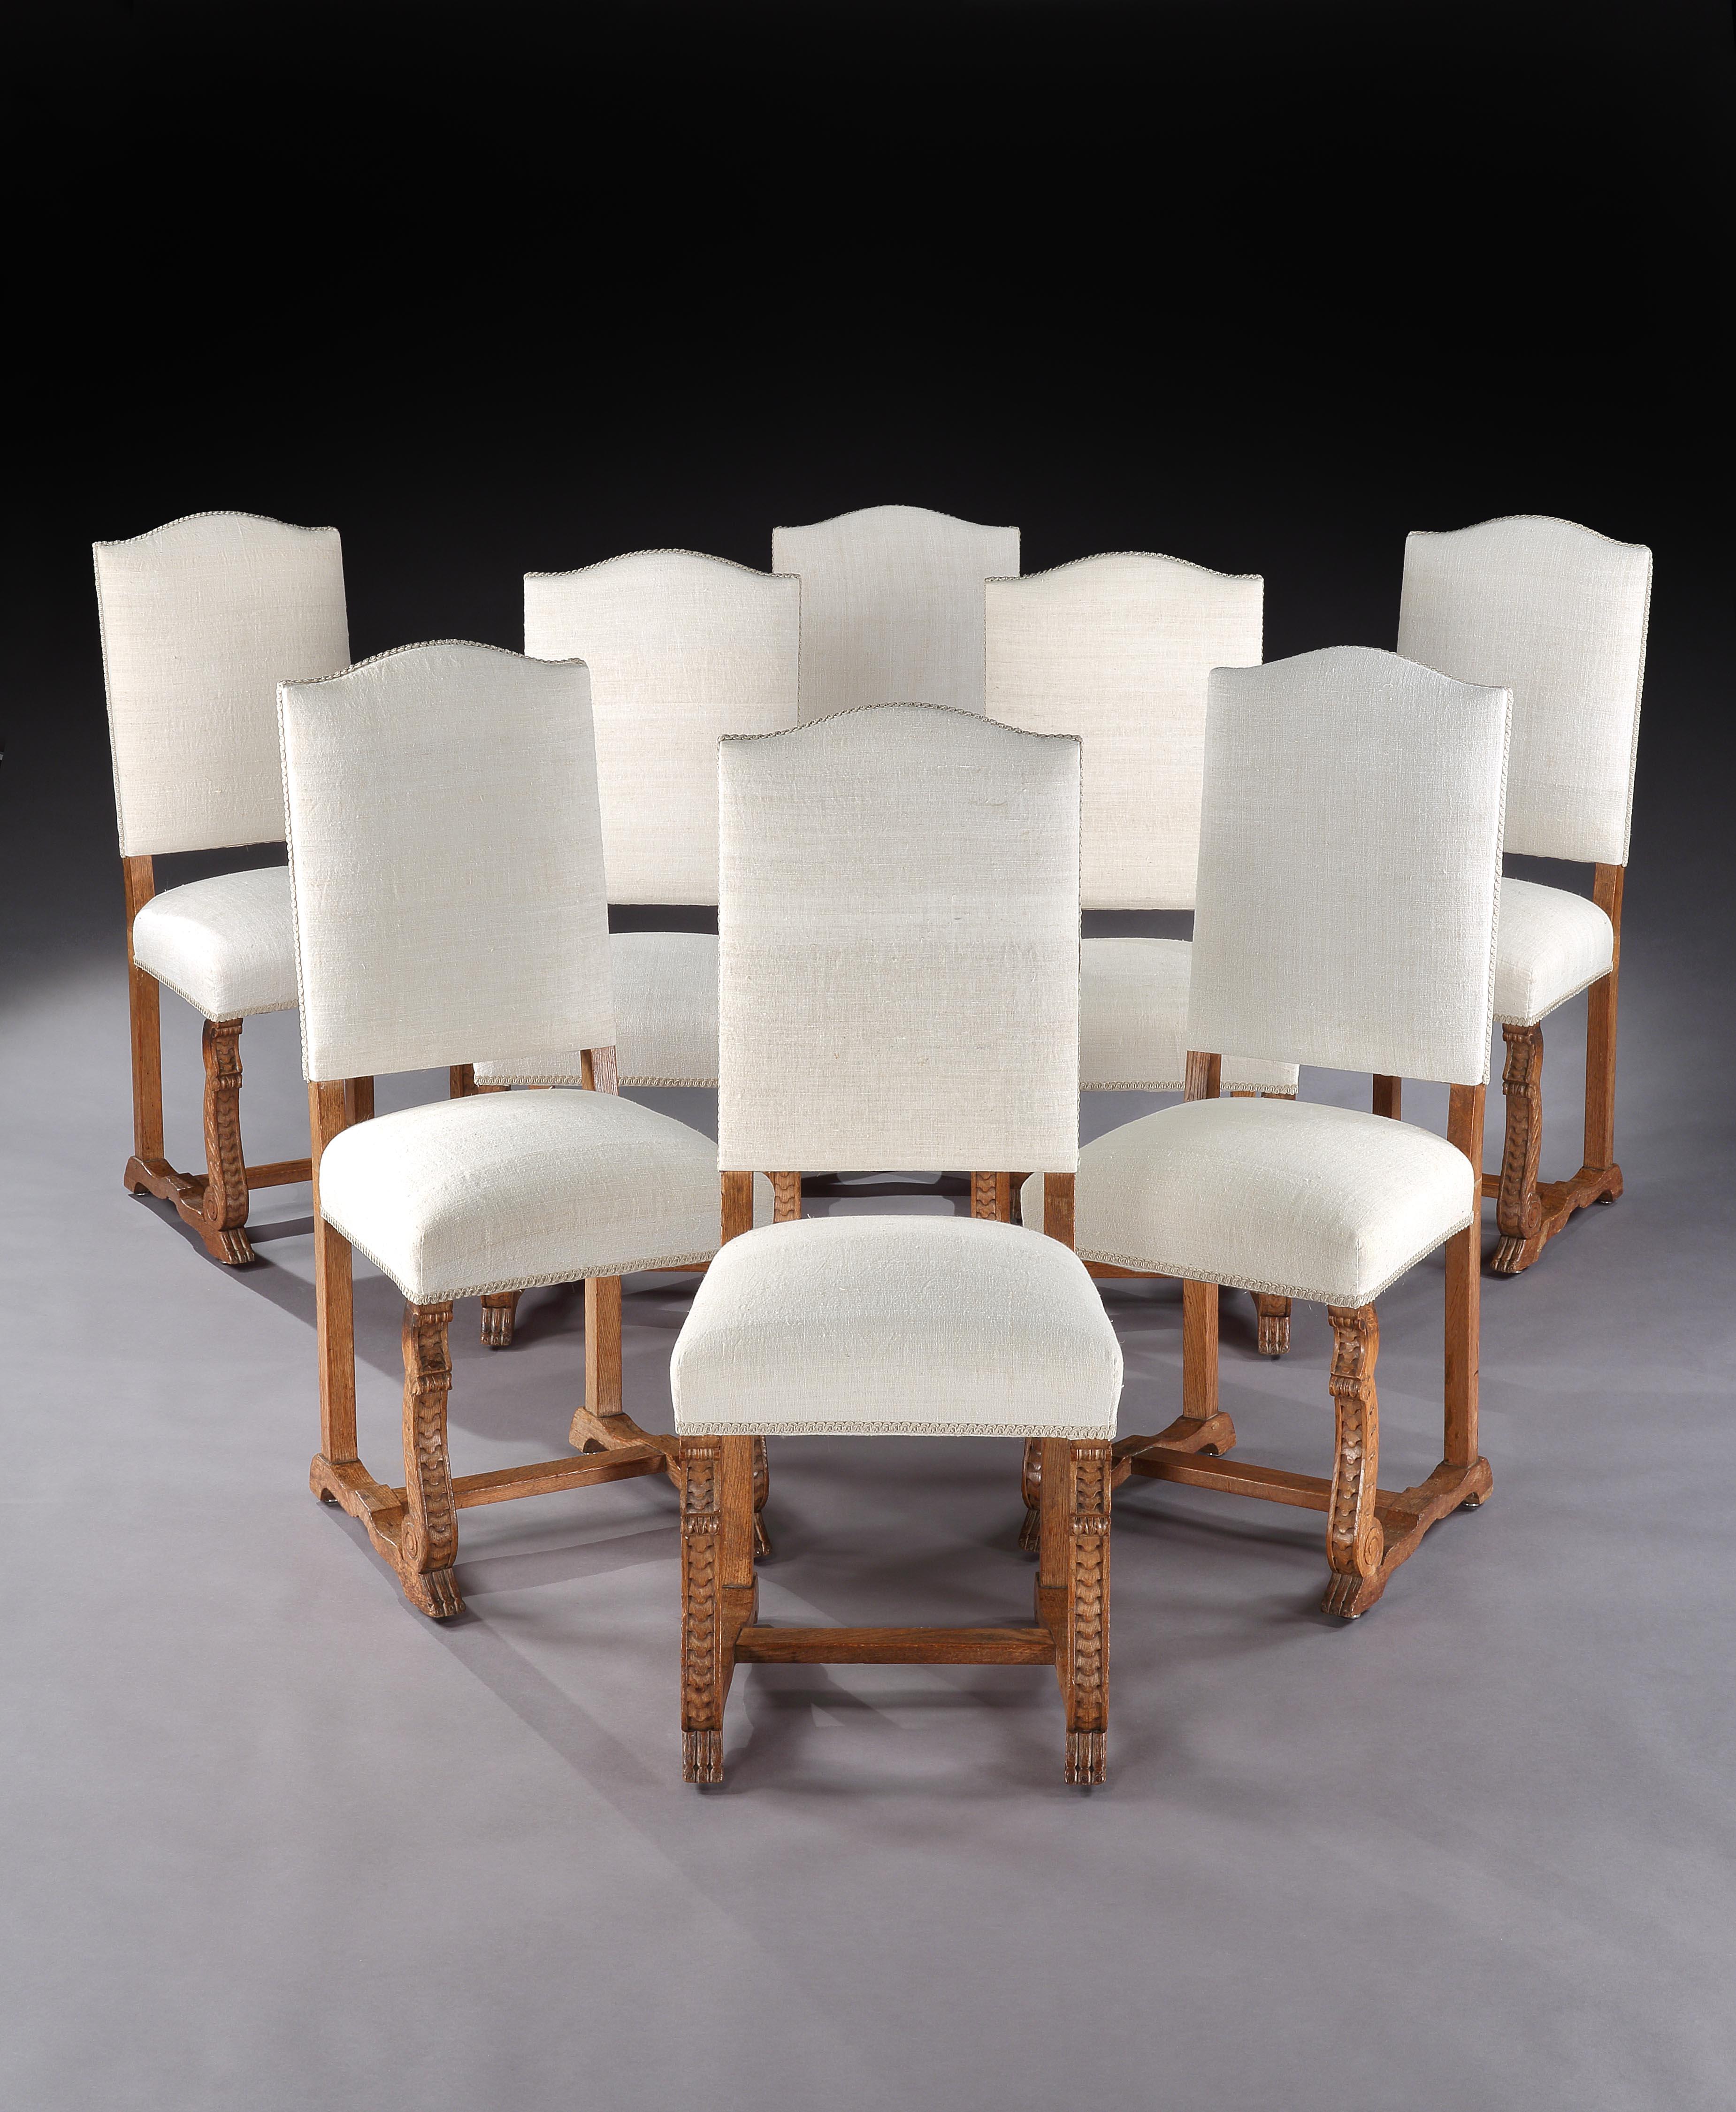 This characterful set of period chairs exude vernacular charm. The 19th century, linen upholstery gives them a fresh, classic appearance which works in period and contemporary interiors. They are sturdy and suitable for regular use. These chairs